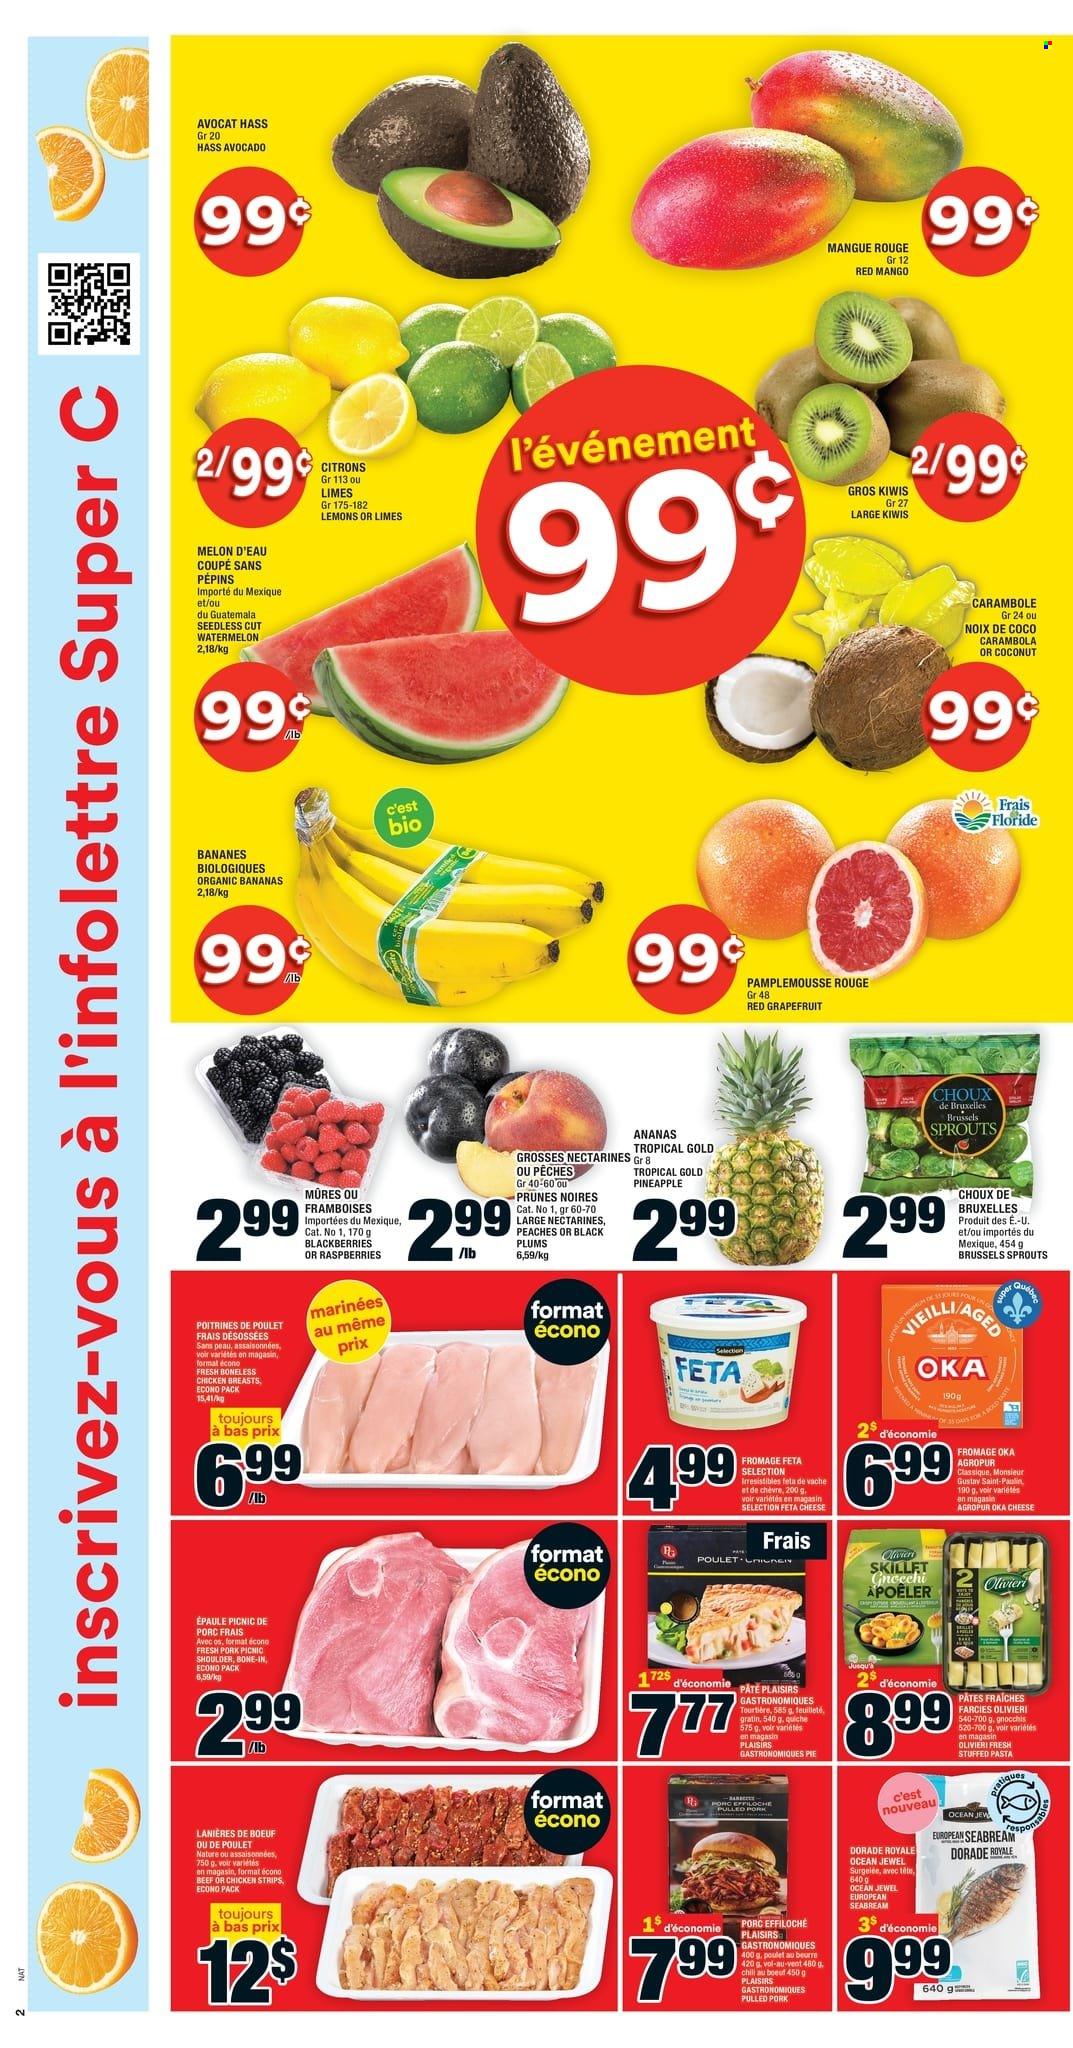 thumbnail - Super C Flyer - March 16, 2023 - March 22, 2023 - Sales products - pie, brussel sprouts, avocado, bananas, blackberries, grapefruits, limes, nectarines, star fruit, watermelon, pineapple, plums, melons, organic bananas, lemons, black plums, peaches, seabream, pasta, pulled pork, cheese, feta, strips, chicken strips, quiche, prunes, dried fruit, chicken breasts, pork meat, gnocchi, kiwi. Page 2.